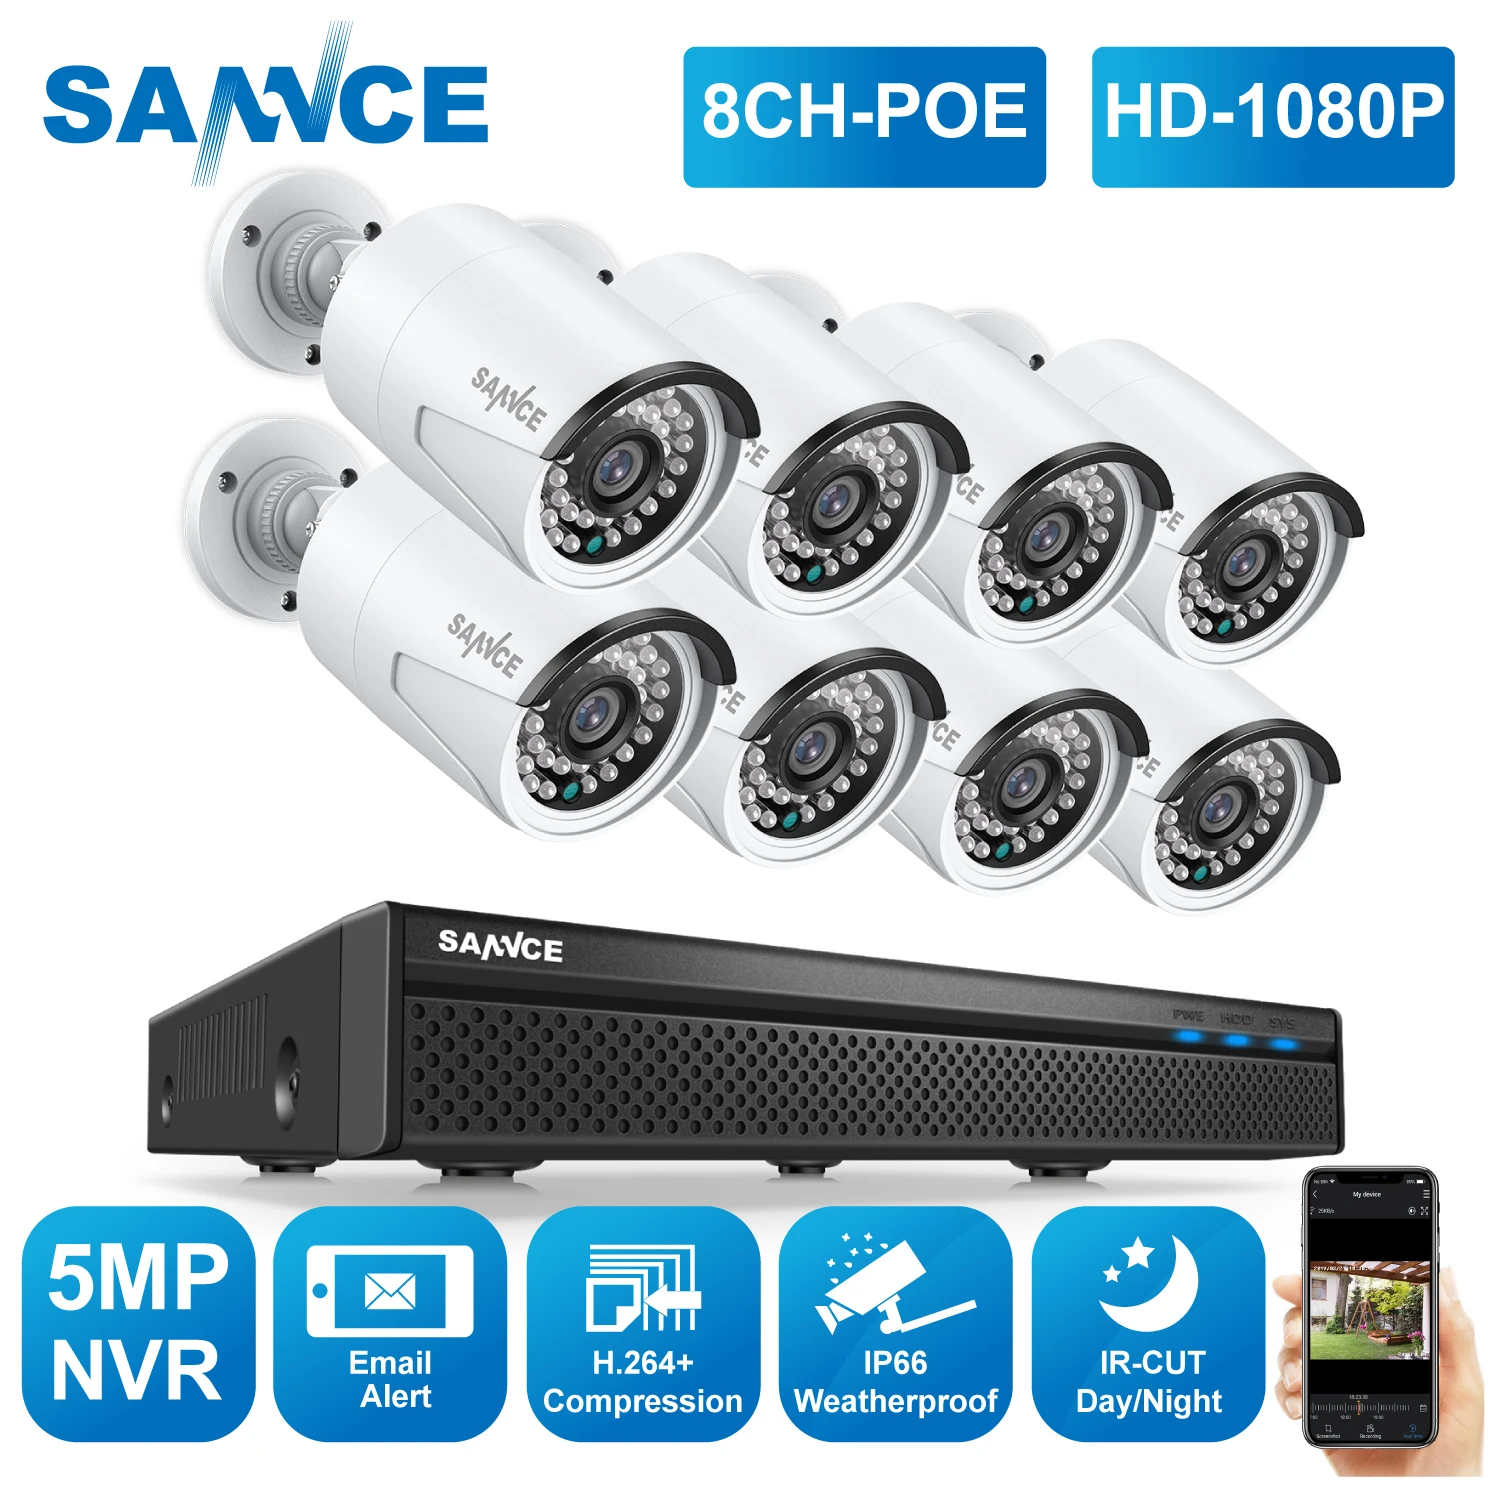 portable cctv camera SANNCE 2MP 5MP Security Cameras POE System H.264+ 5MP NVR 4X 6X 8X 1080P Video Surveillance Cameras With Audio Record IP Camera hd security camera